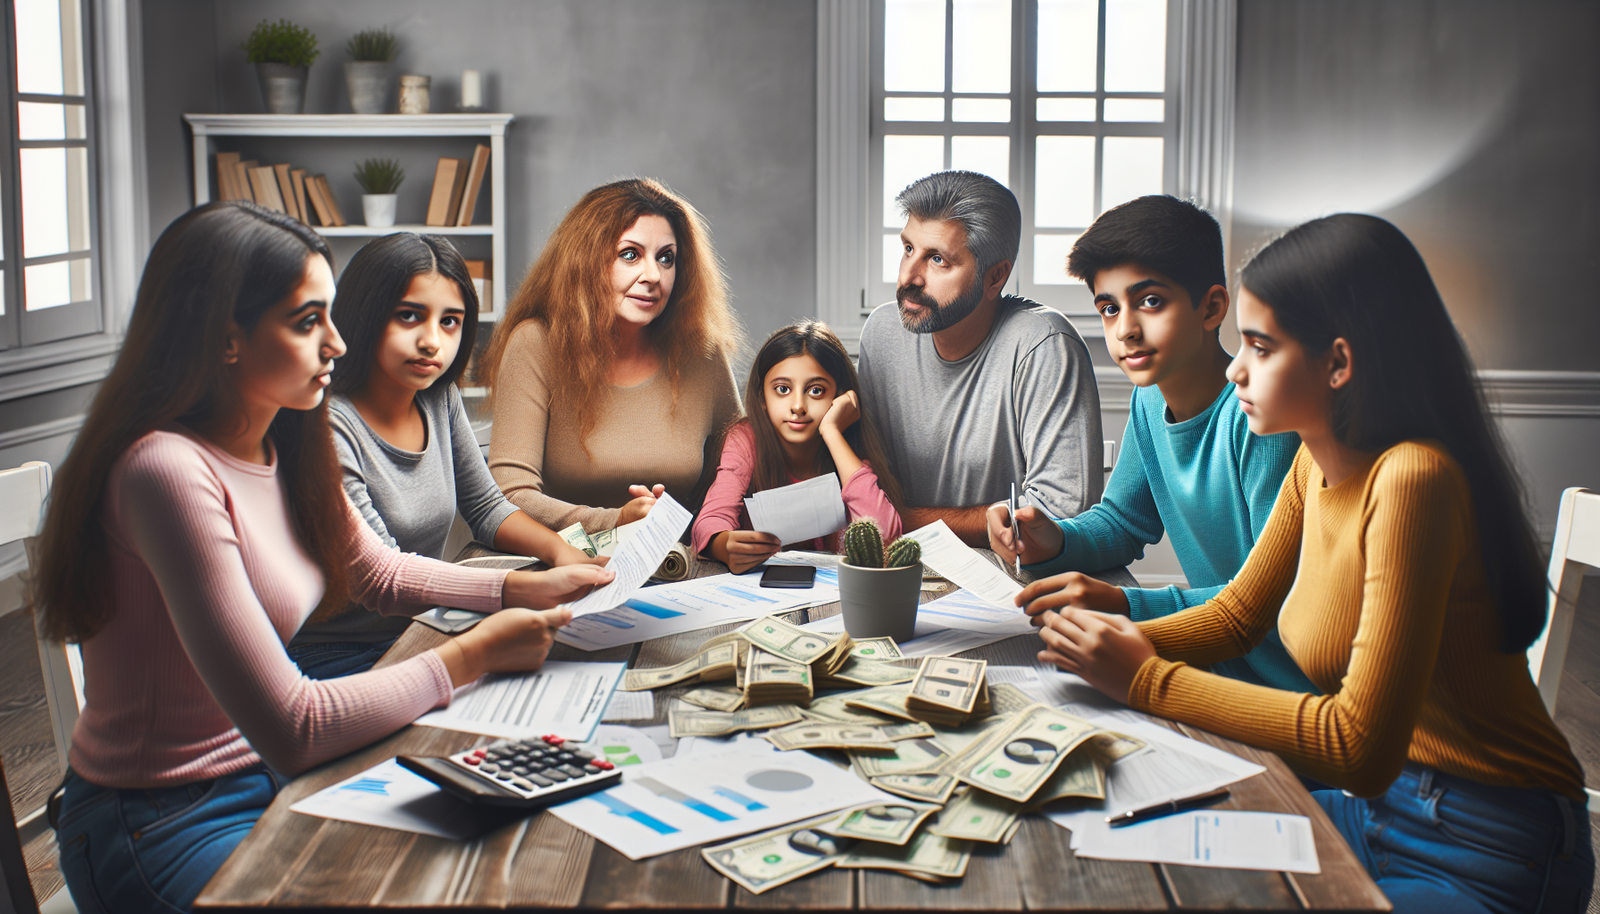 Open Communication: Start By Having Open And Honest Discussions About The Familys Financial Situation. Encourage Everyone To Share Their Concerns, Ideas, And Contributions Towards Managing The Debt.